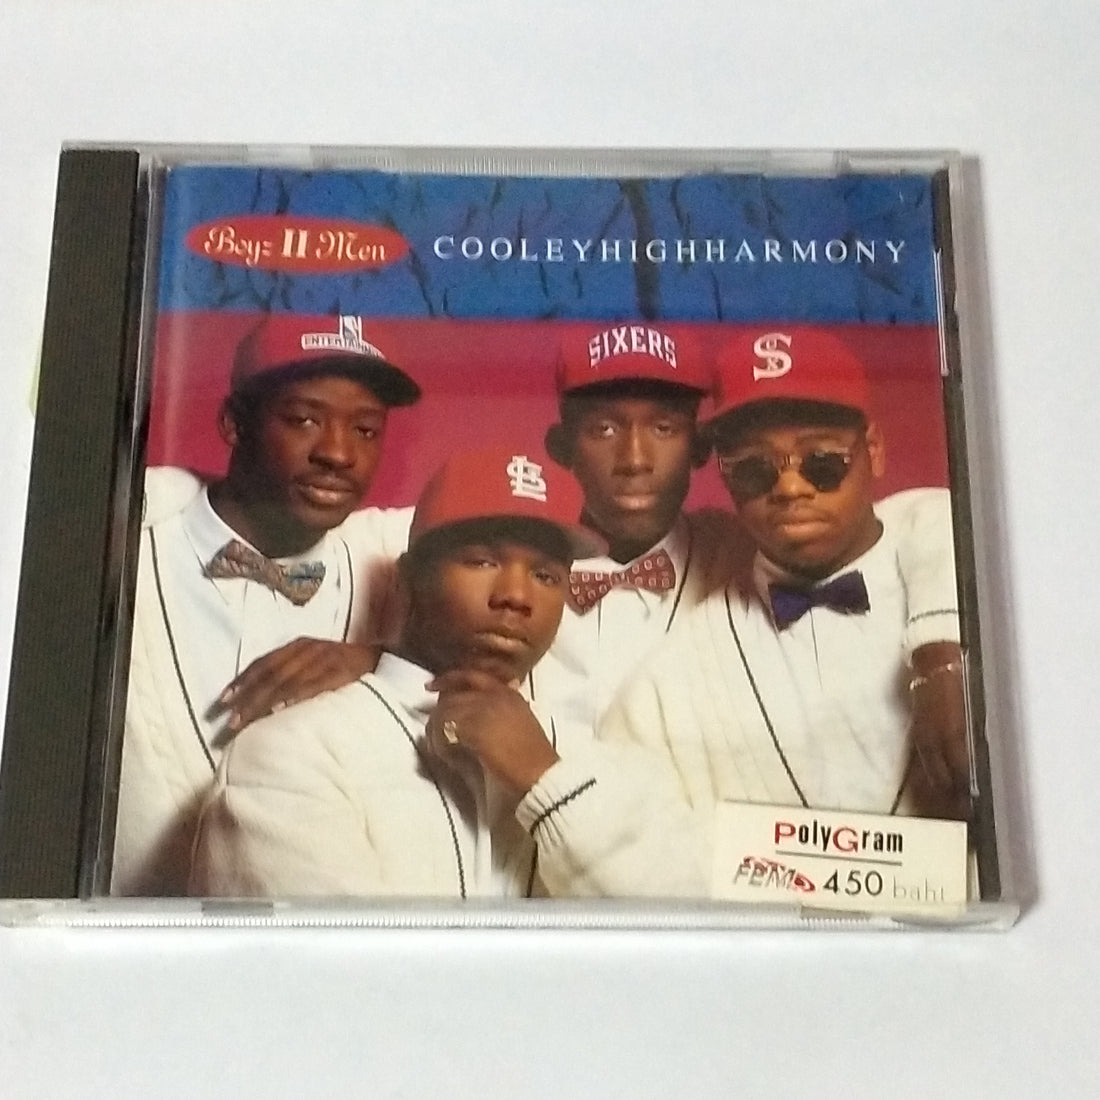 Buy Boyz II Men : Cooleyhighharmony (CD) Online for a great price 